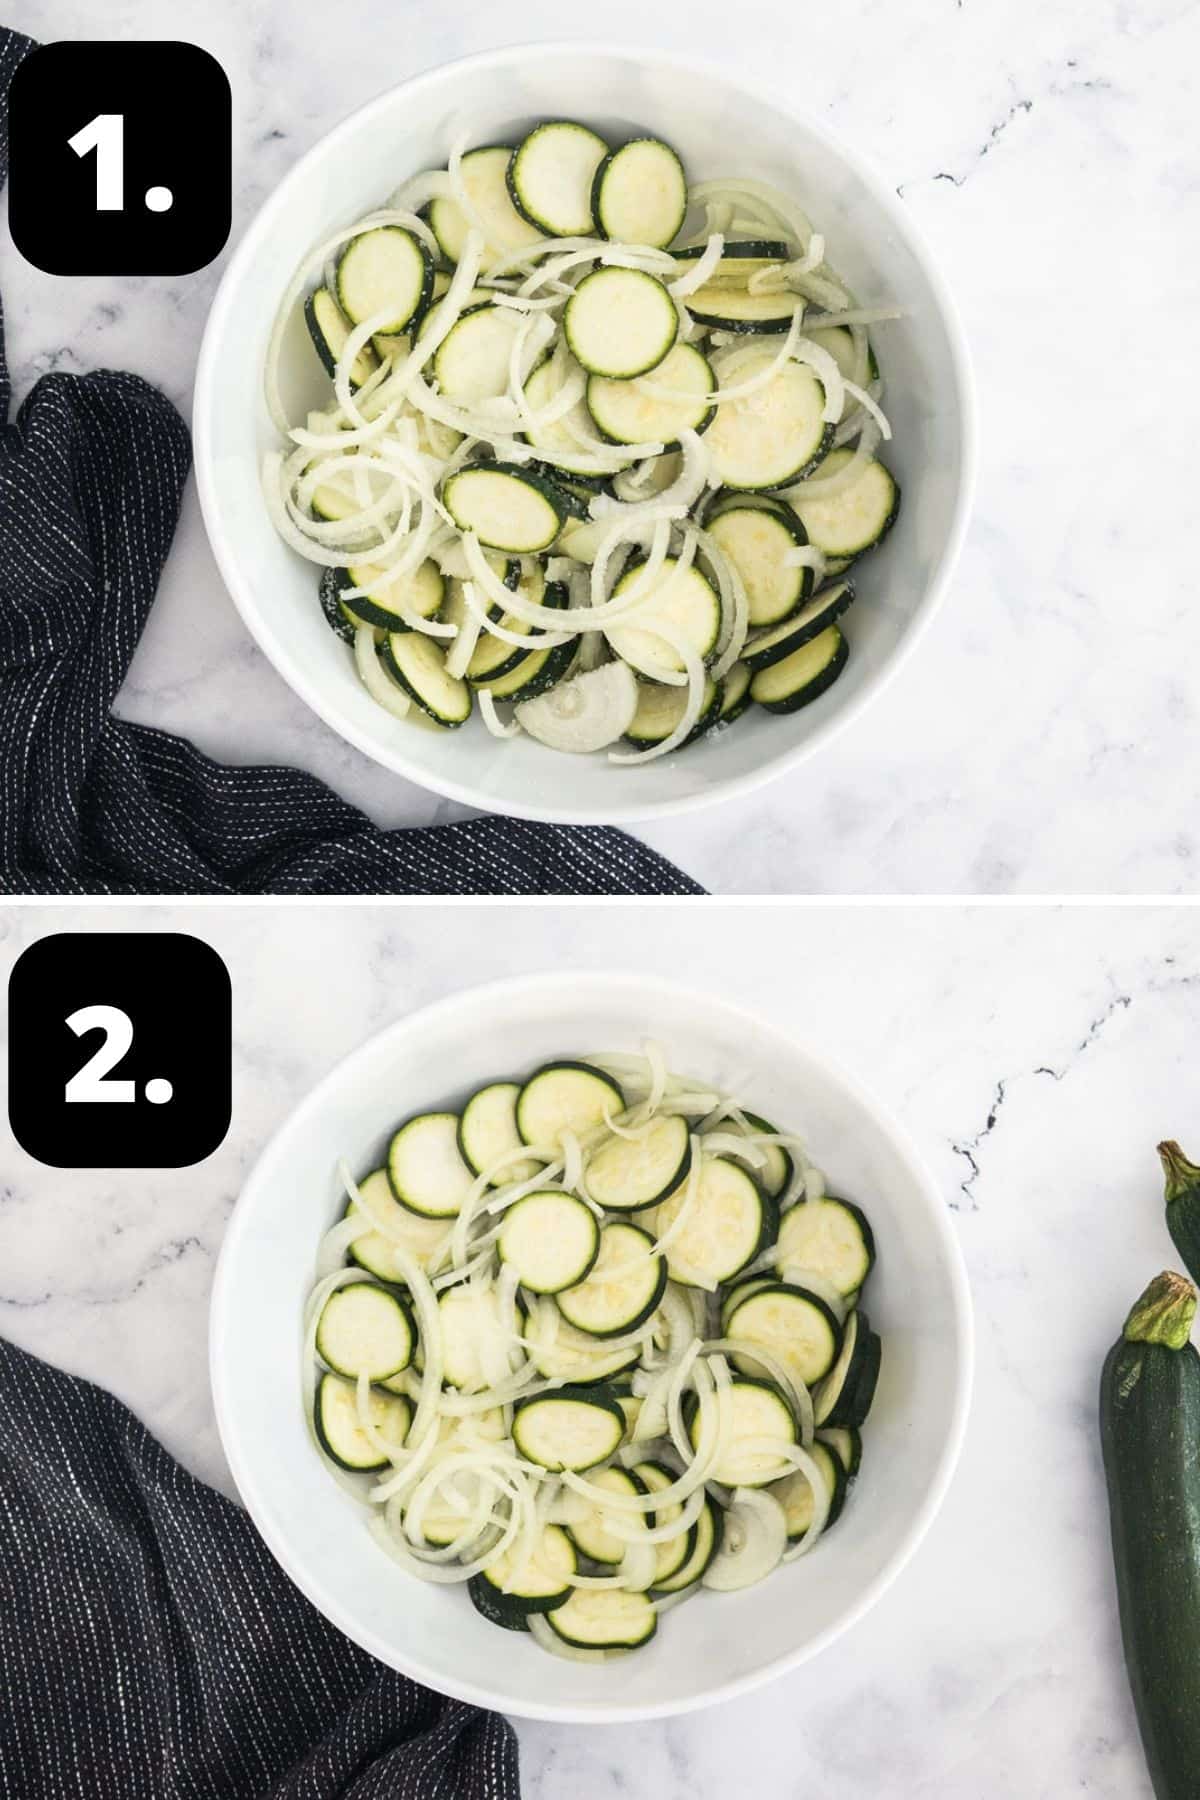 Steps 1-2 of preparing this recipe - the zucchini, onion and salt in a bowl and the mixture after four hours.